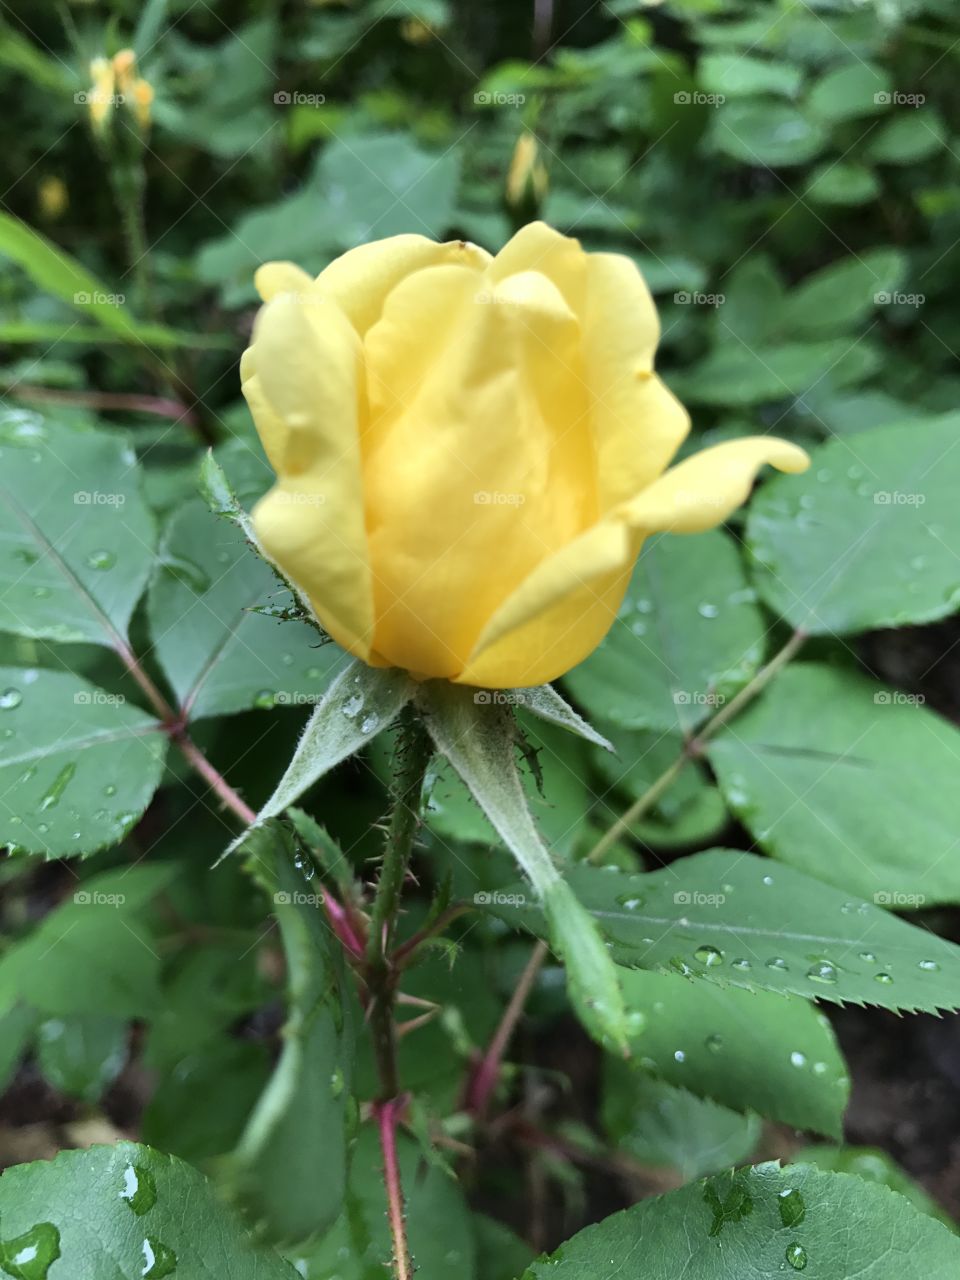 Bright Yellow rose with rain dropped leaves